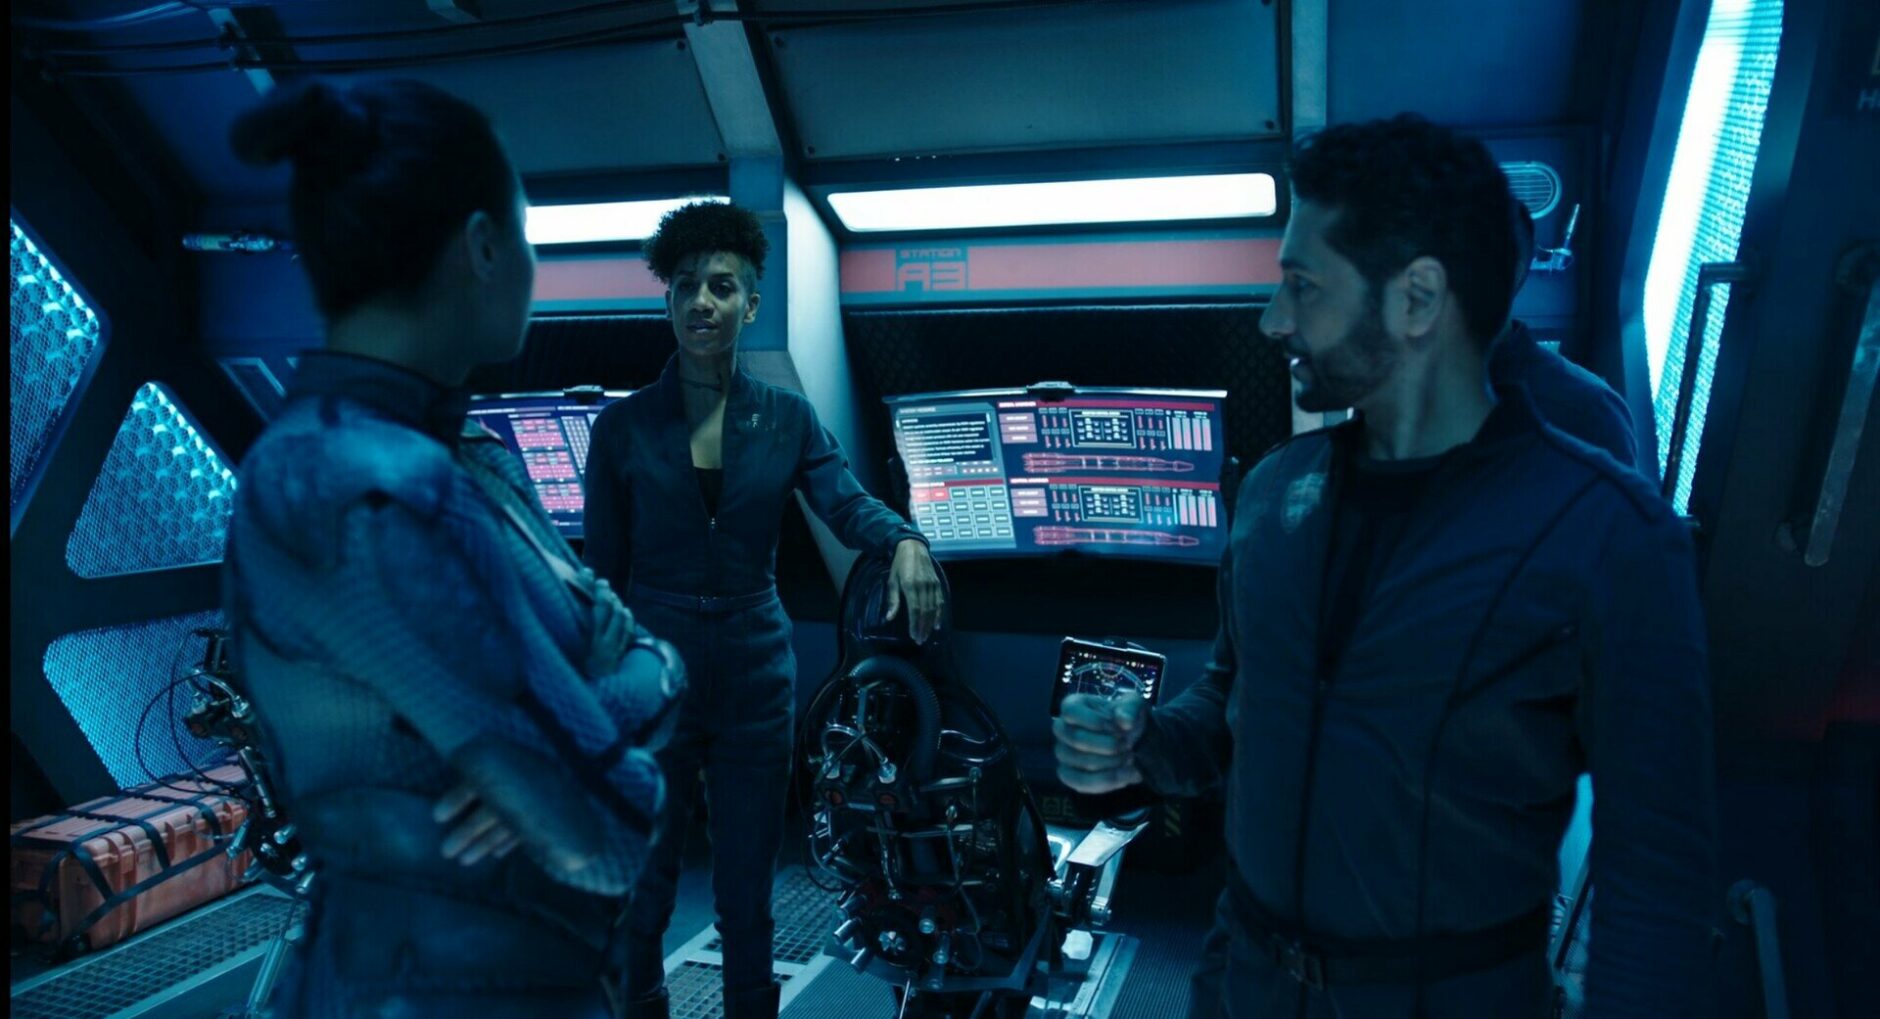 Three Rocinante crew members talking on desk with curved panels behind them.